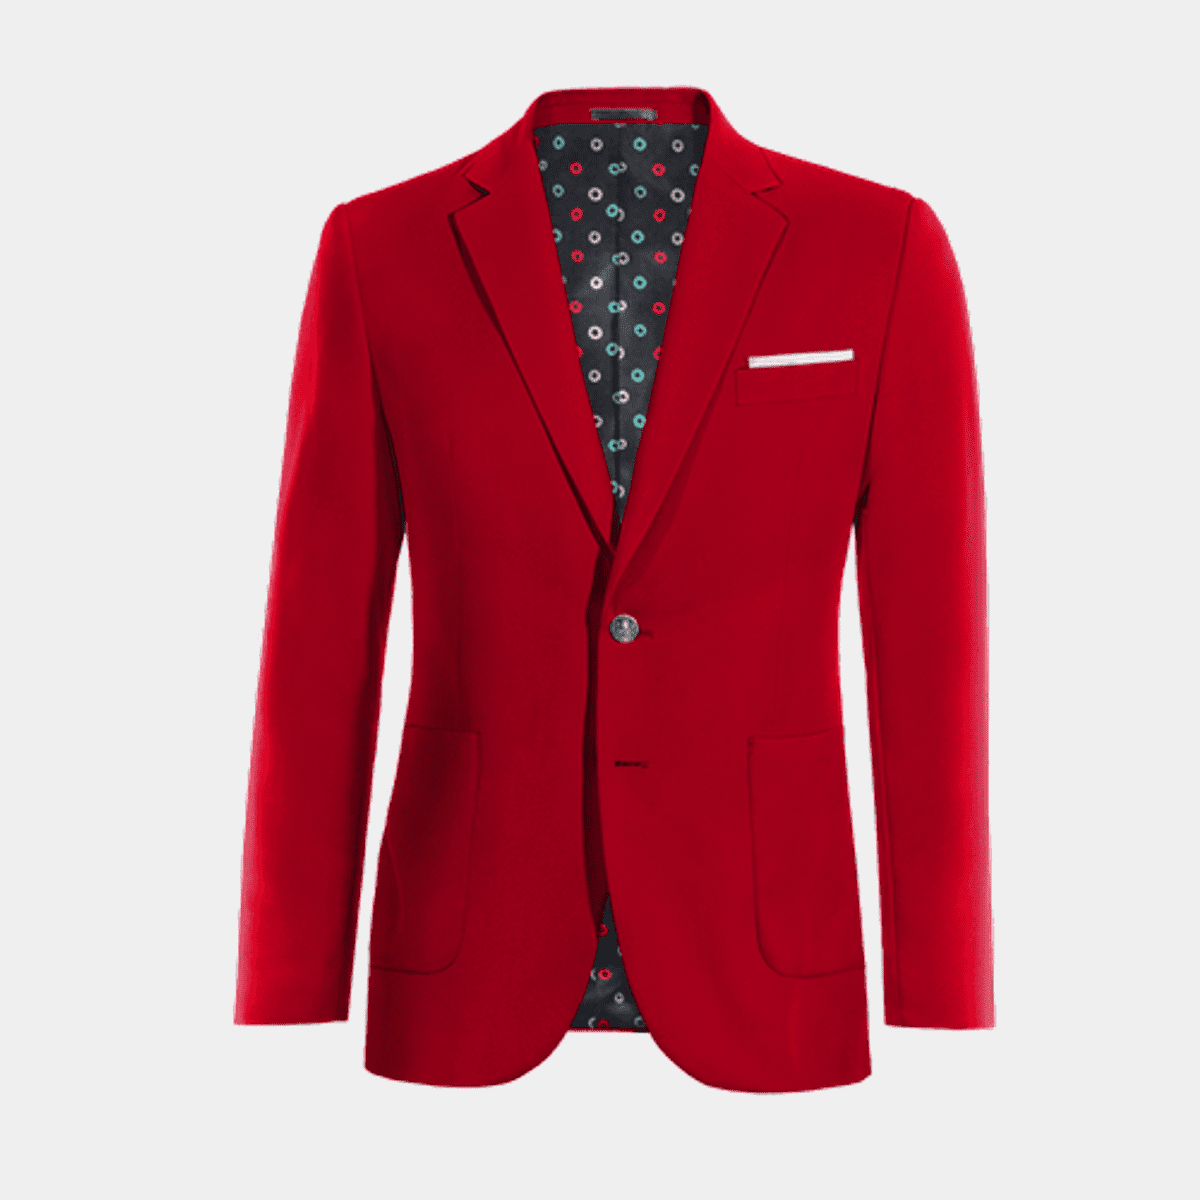 Red Suit Jacket with pocket square